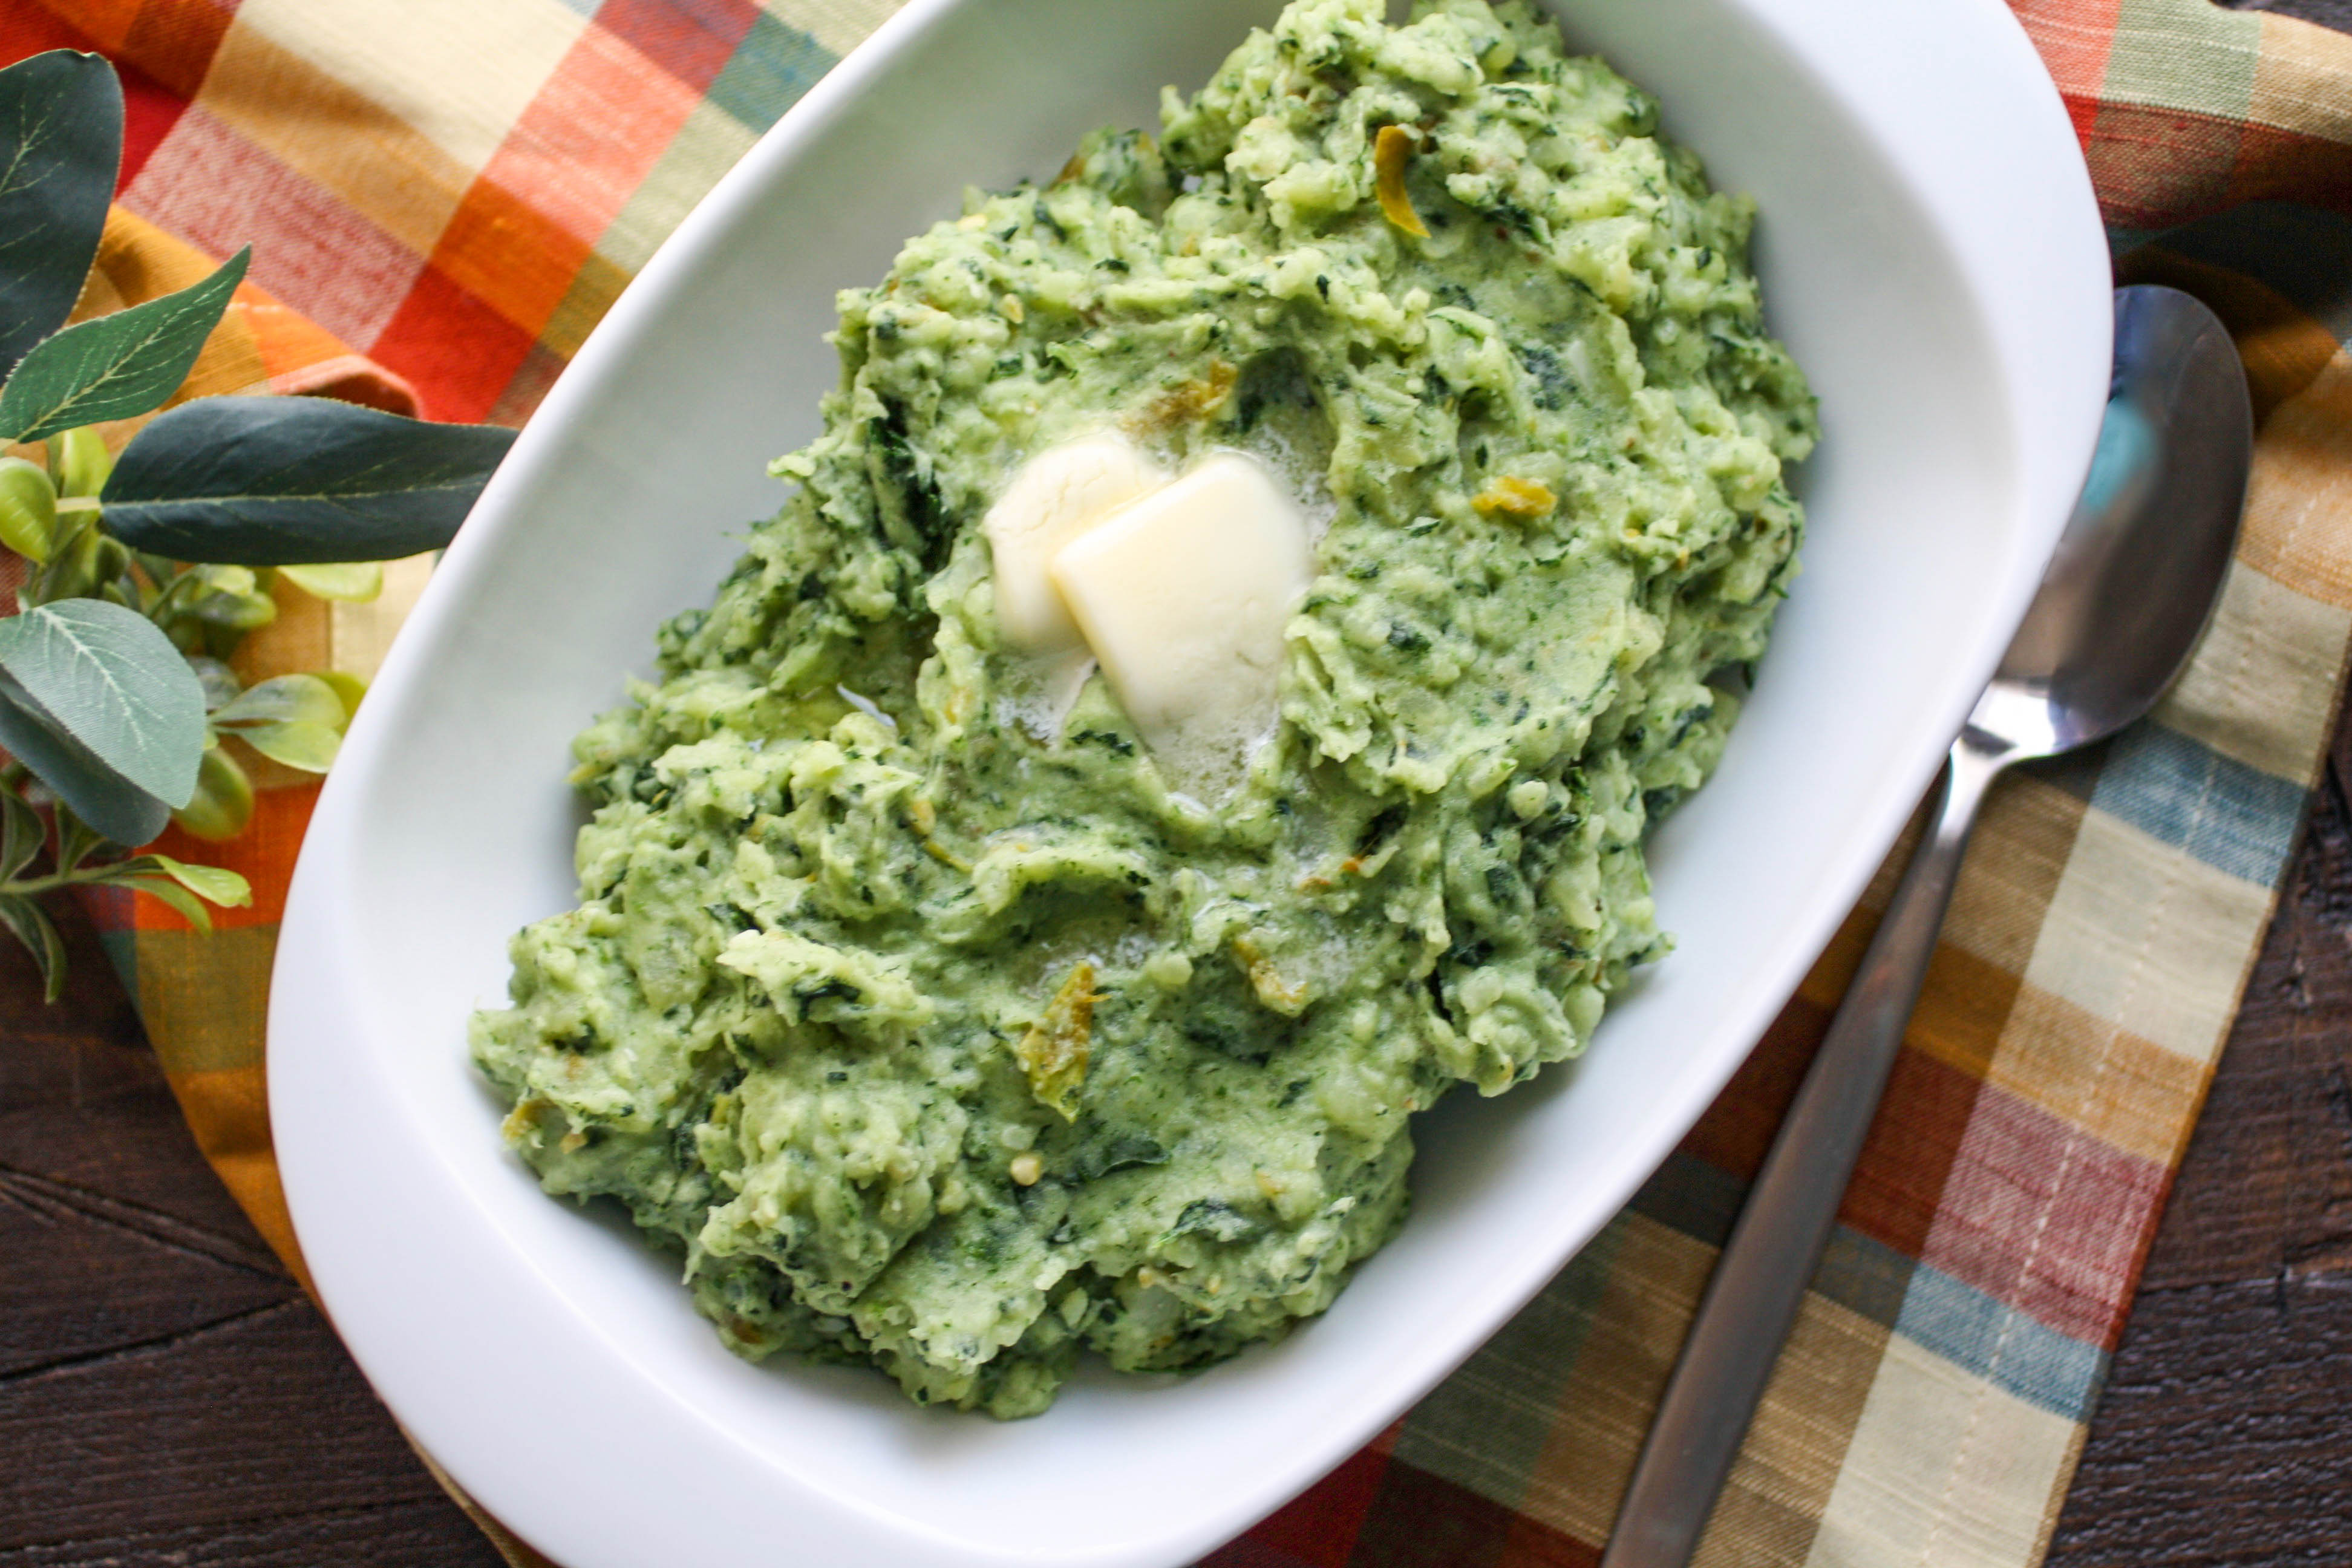 What better time than St. Patrick's Day to serve Southwestern Kale Colcannon!